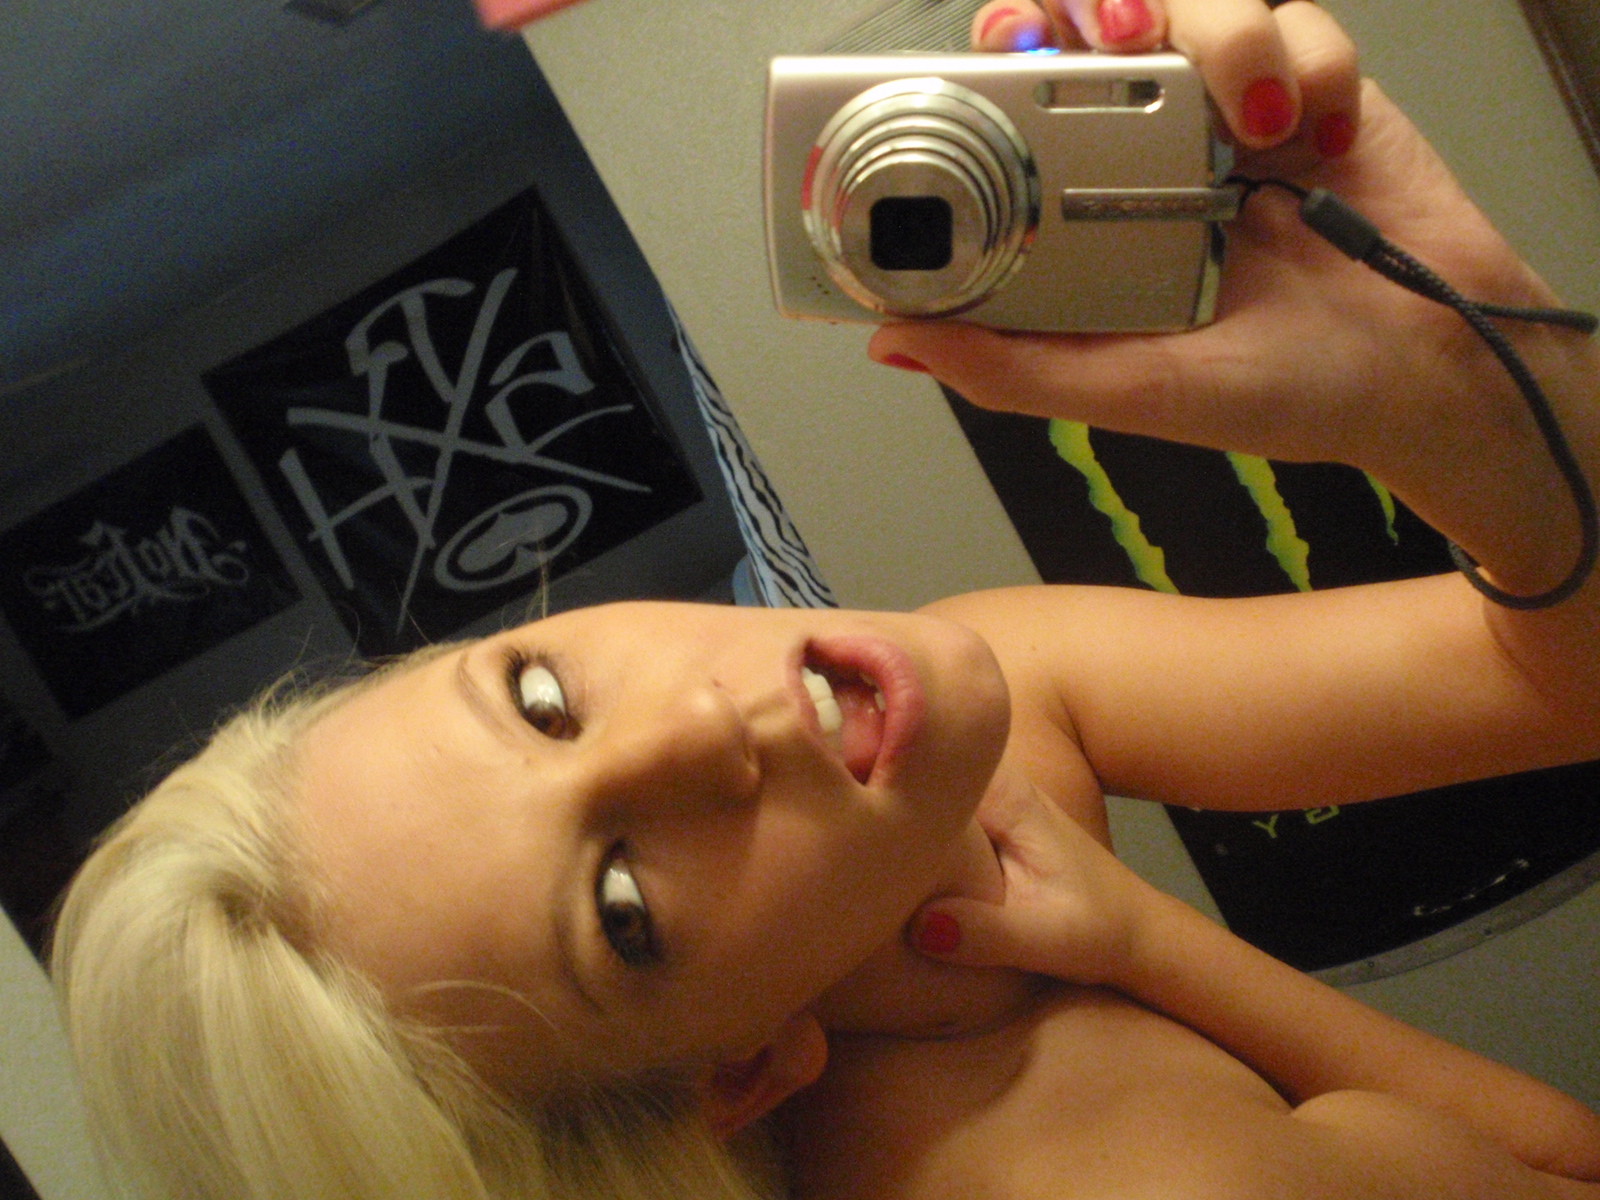 young-blonde-naked-selfie-mirror-naughty-amateur-girl-25